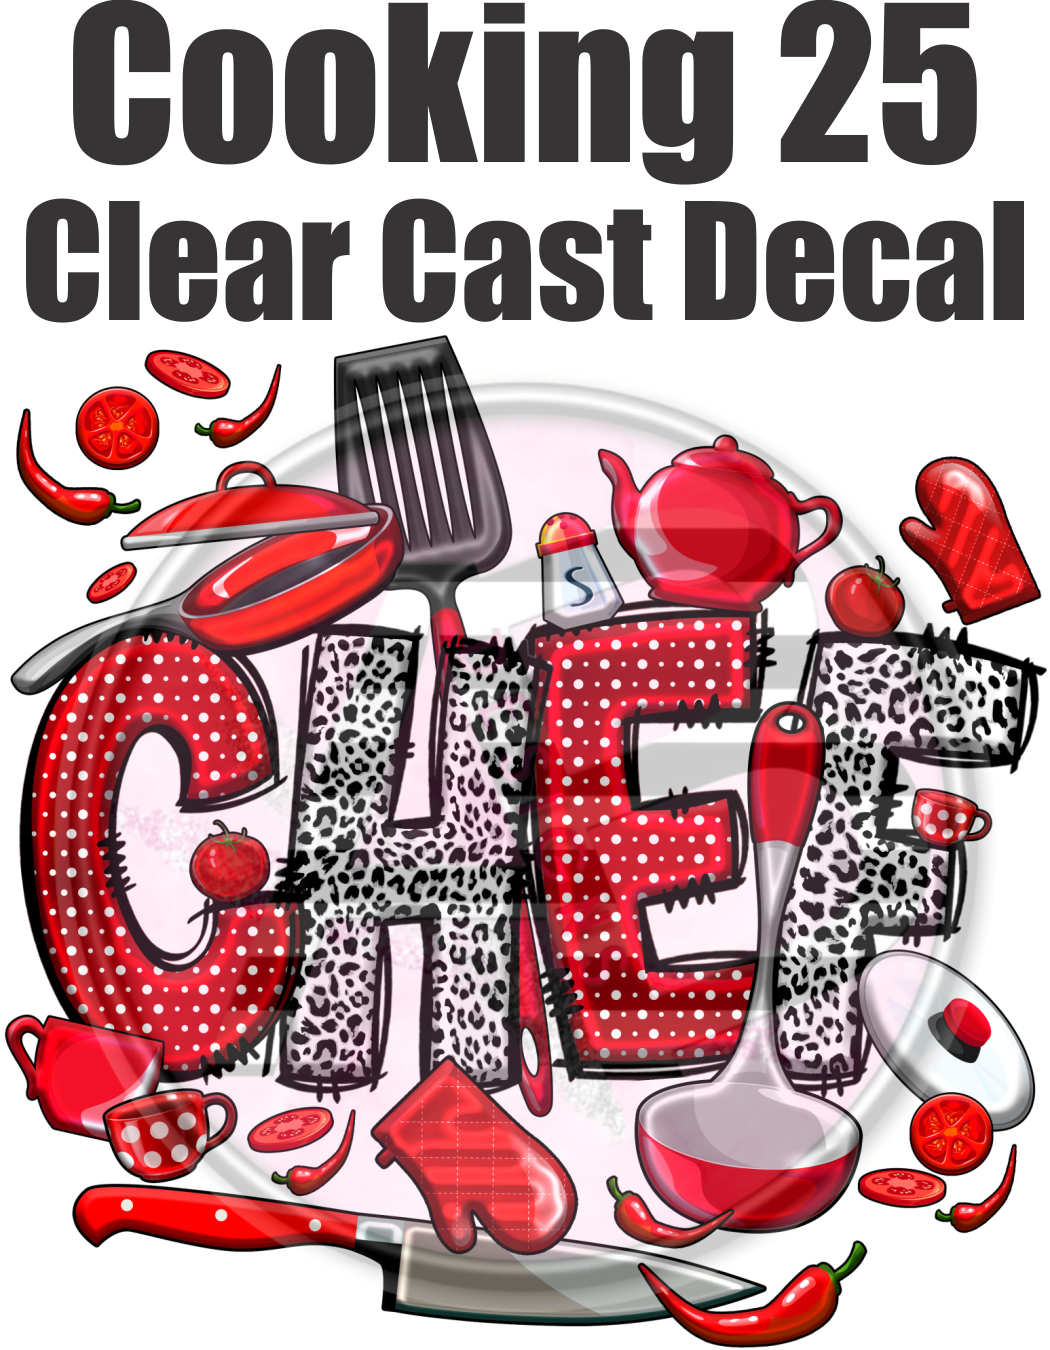 Cooking 25 - Clear Cast Decal - 173